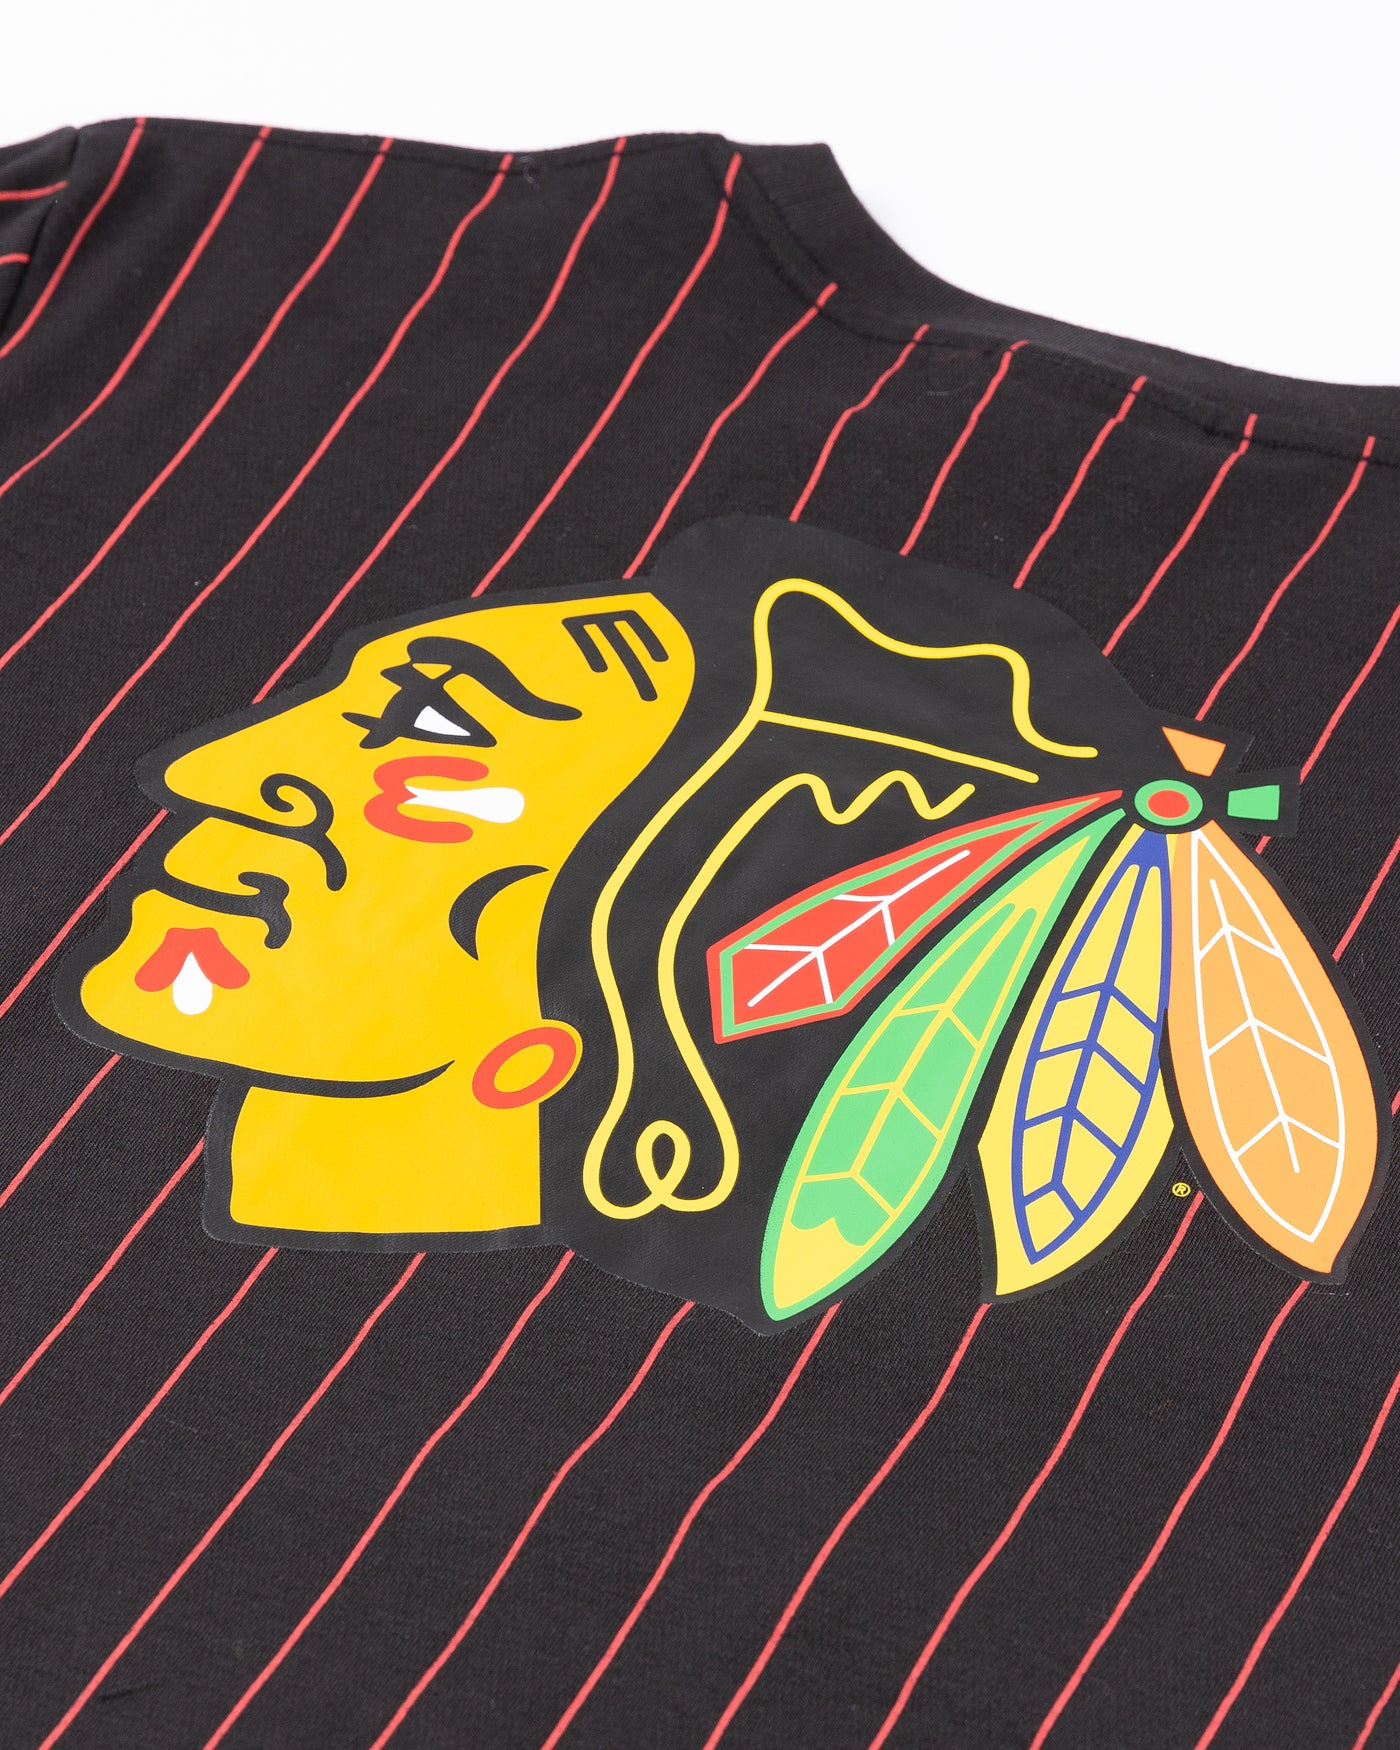 black New Era tee with red pinstripes and Chicago Blackhawks wordmark embroidered on front and primary logo printed on back - back detail lay flat